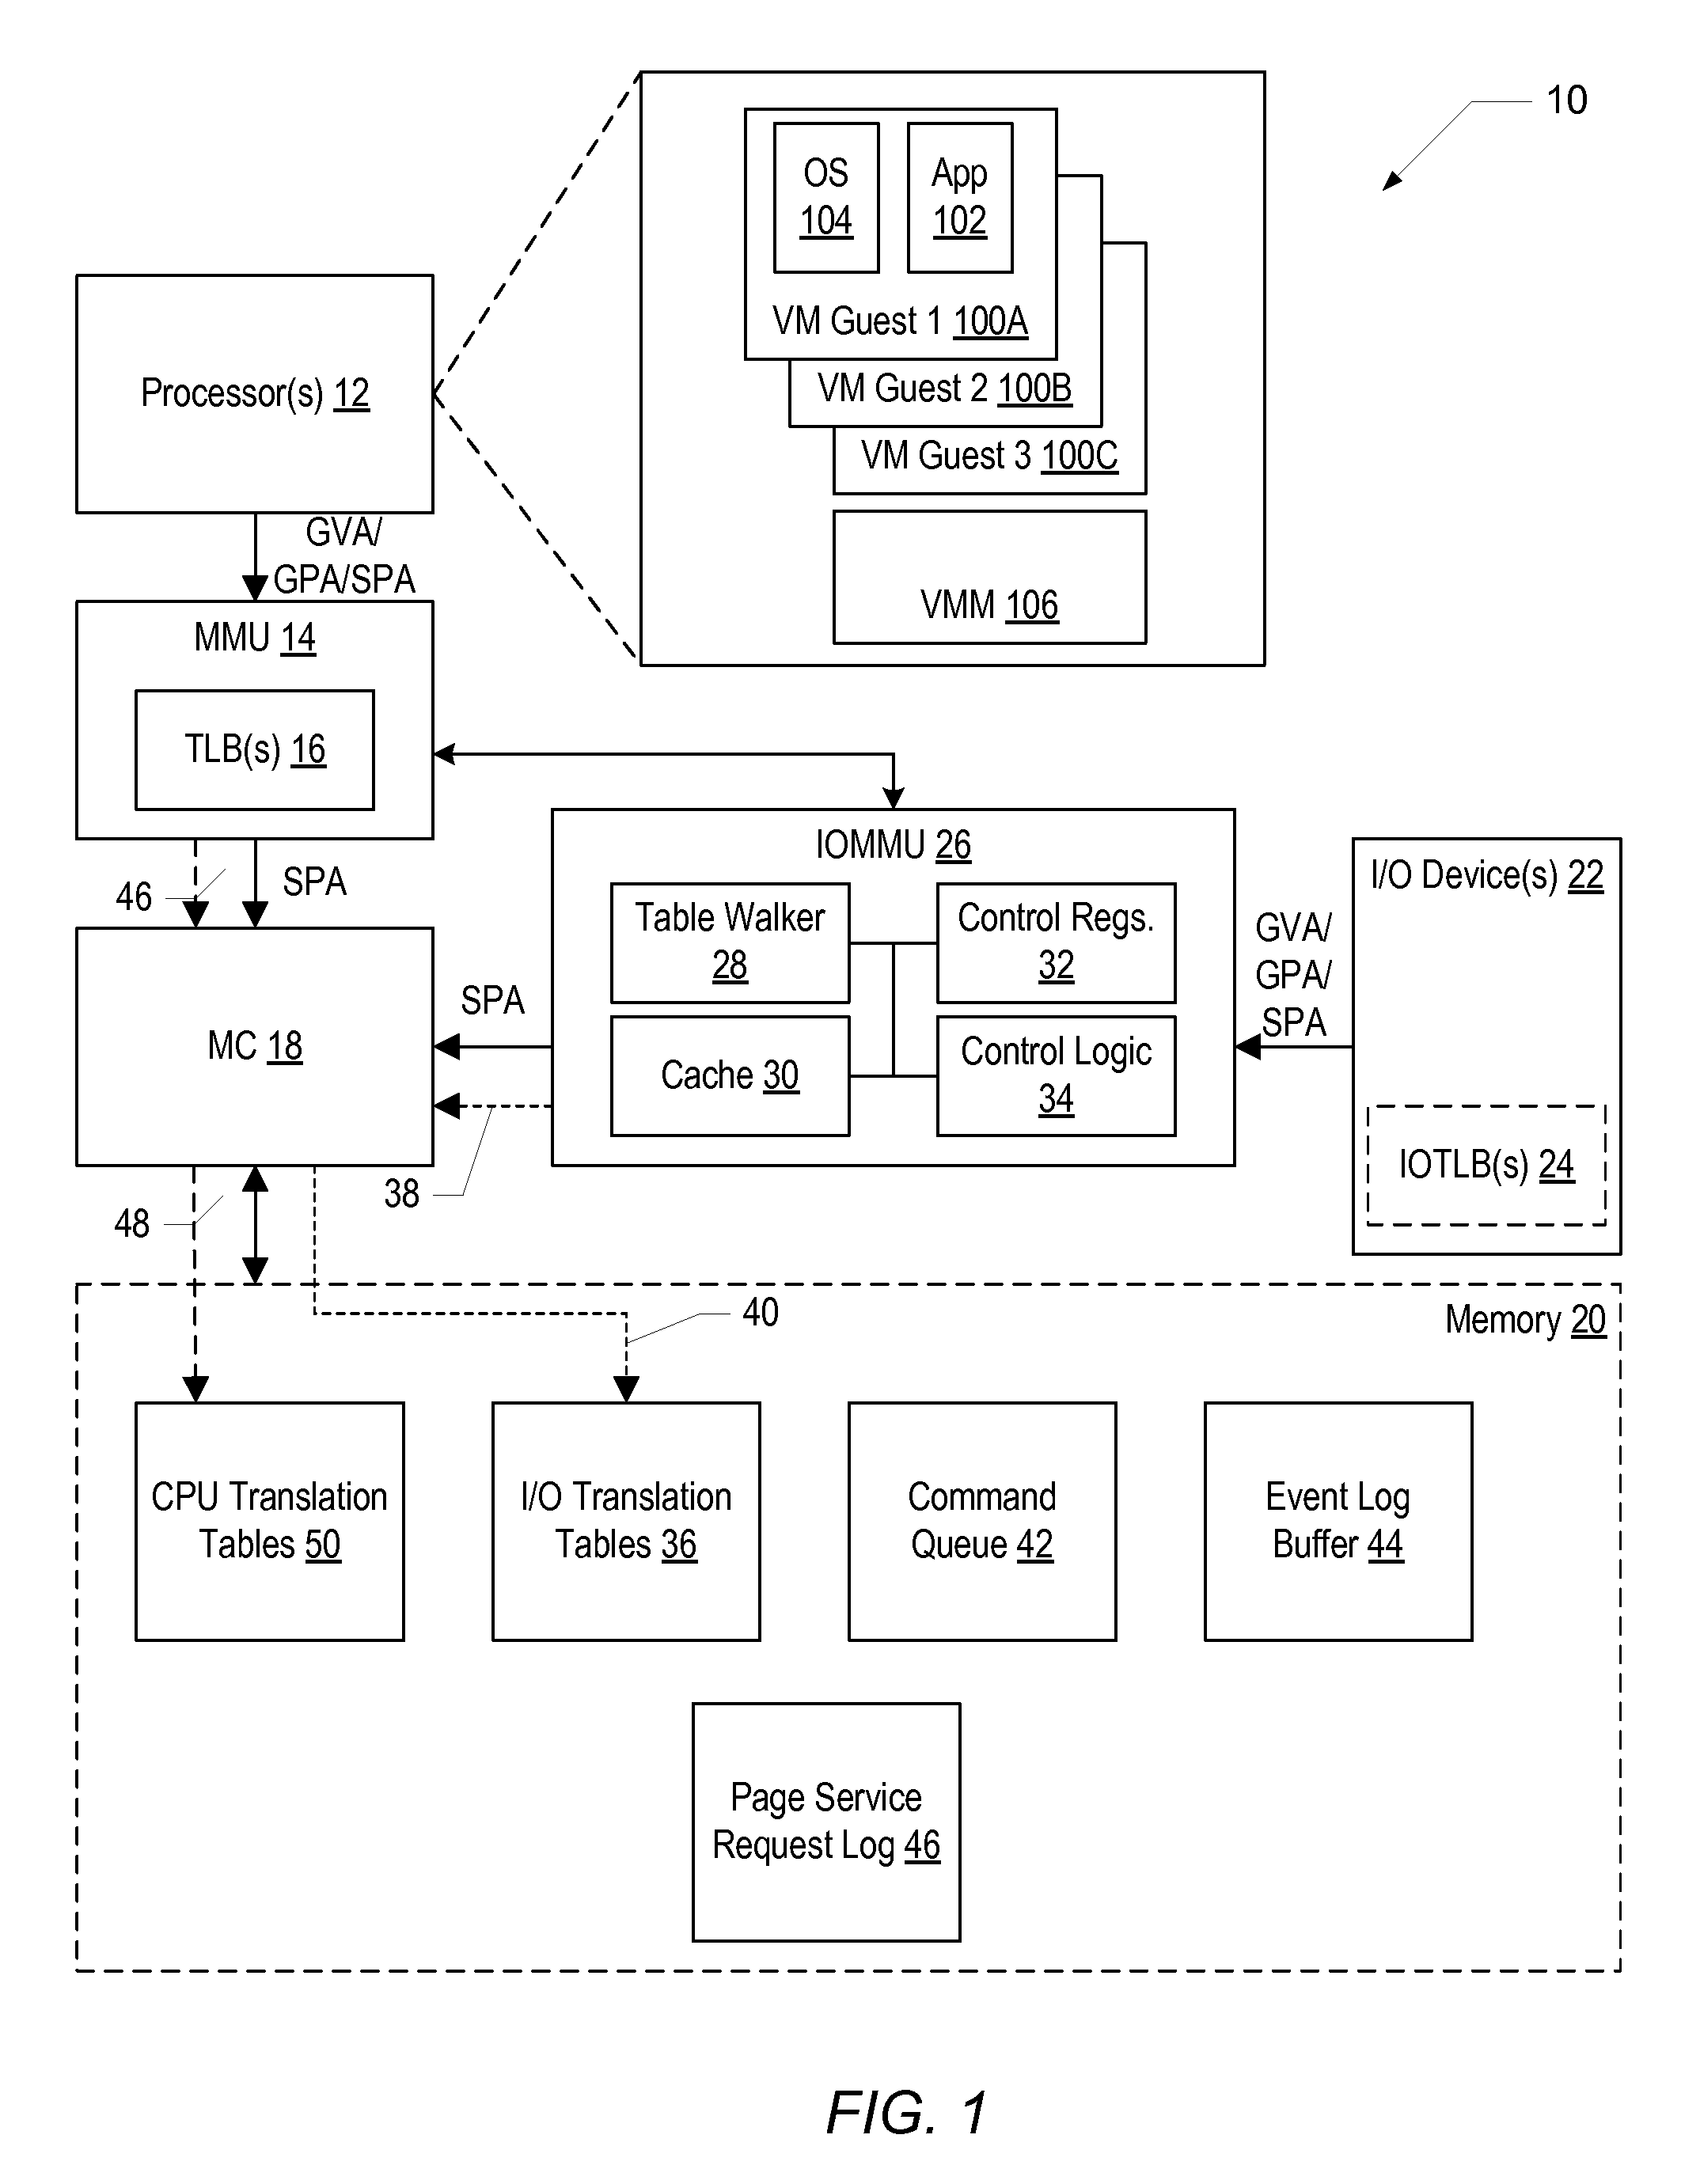 Iommu using two-level address translation for I/O and computation offload devices on a peripheral interconnect